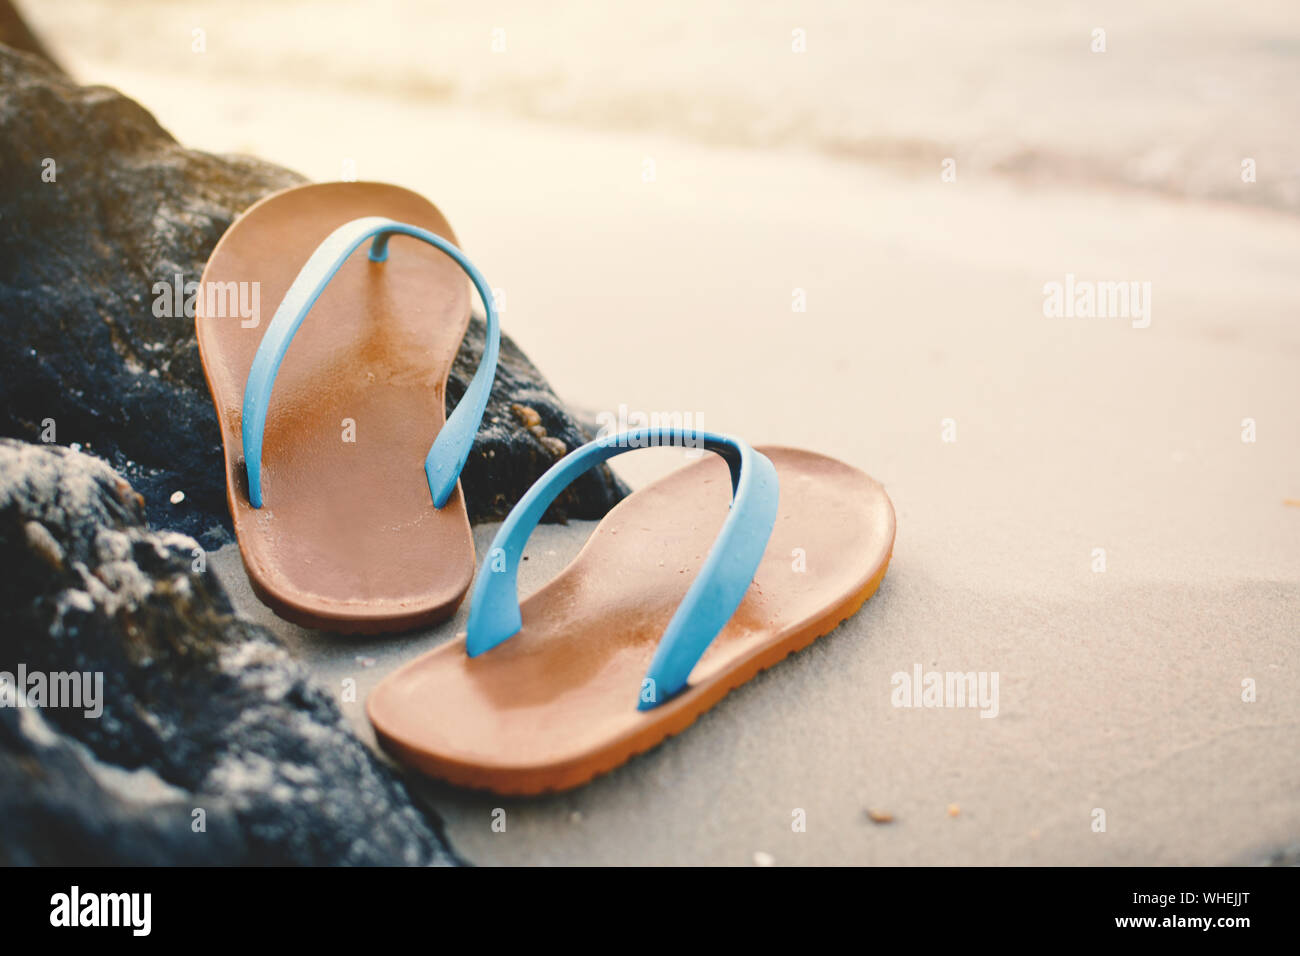 Close-up View Of Flip-flop On Sand At Beach Stock Photo